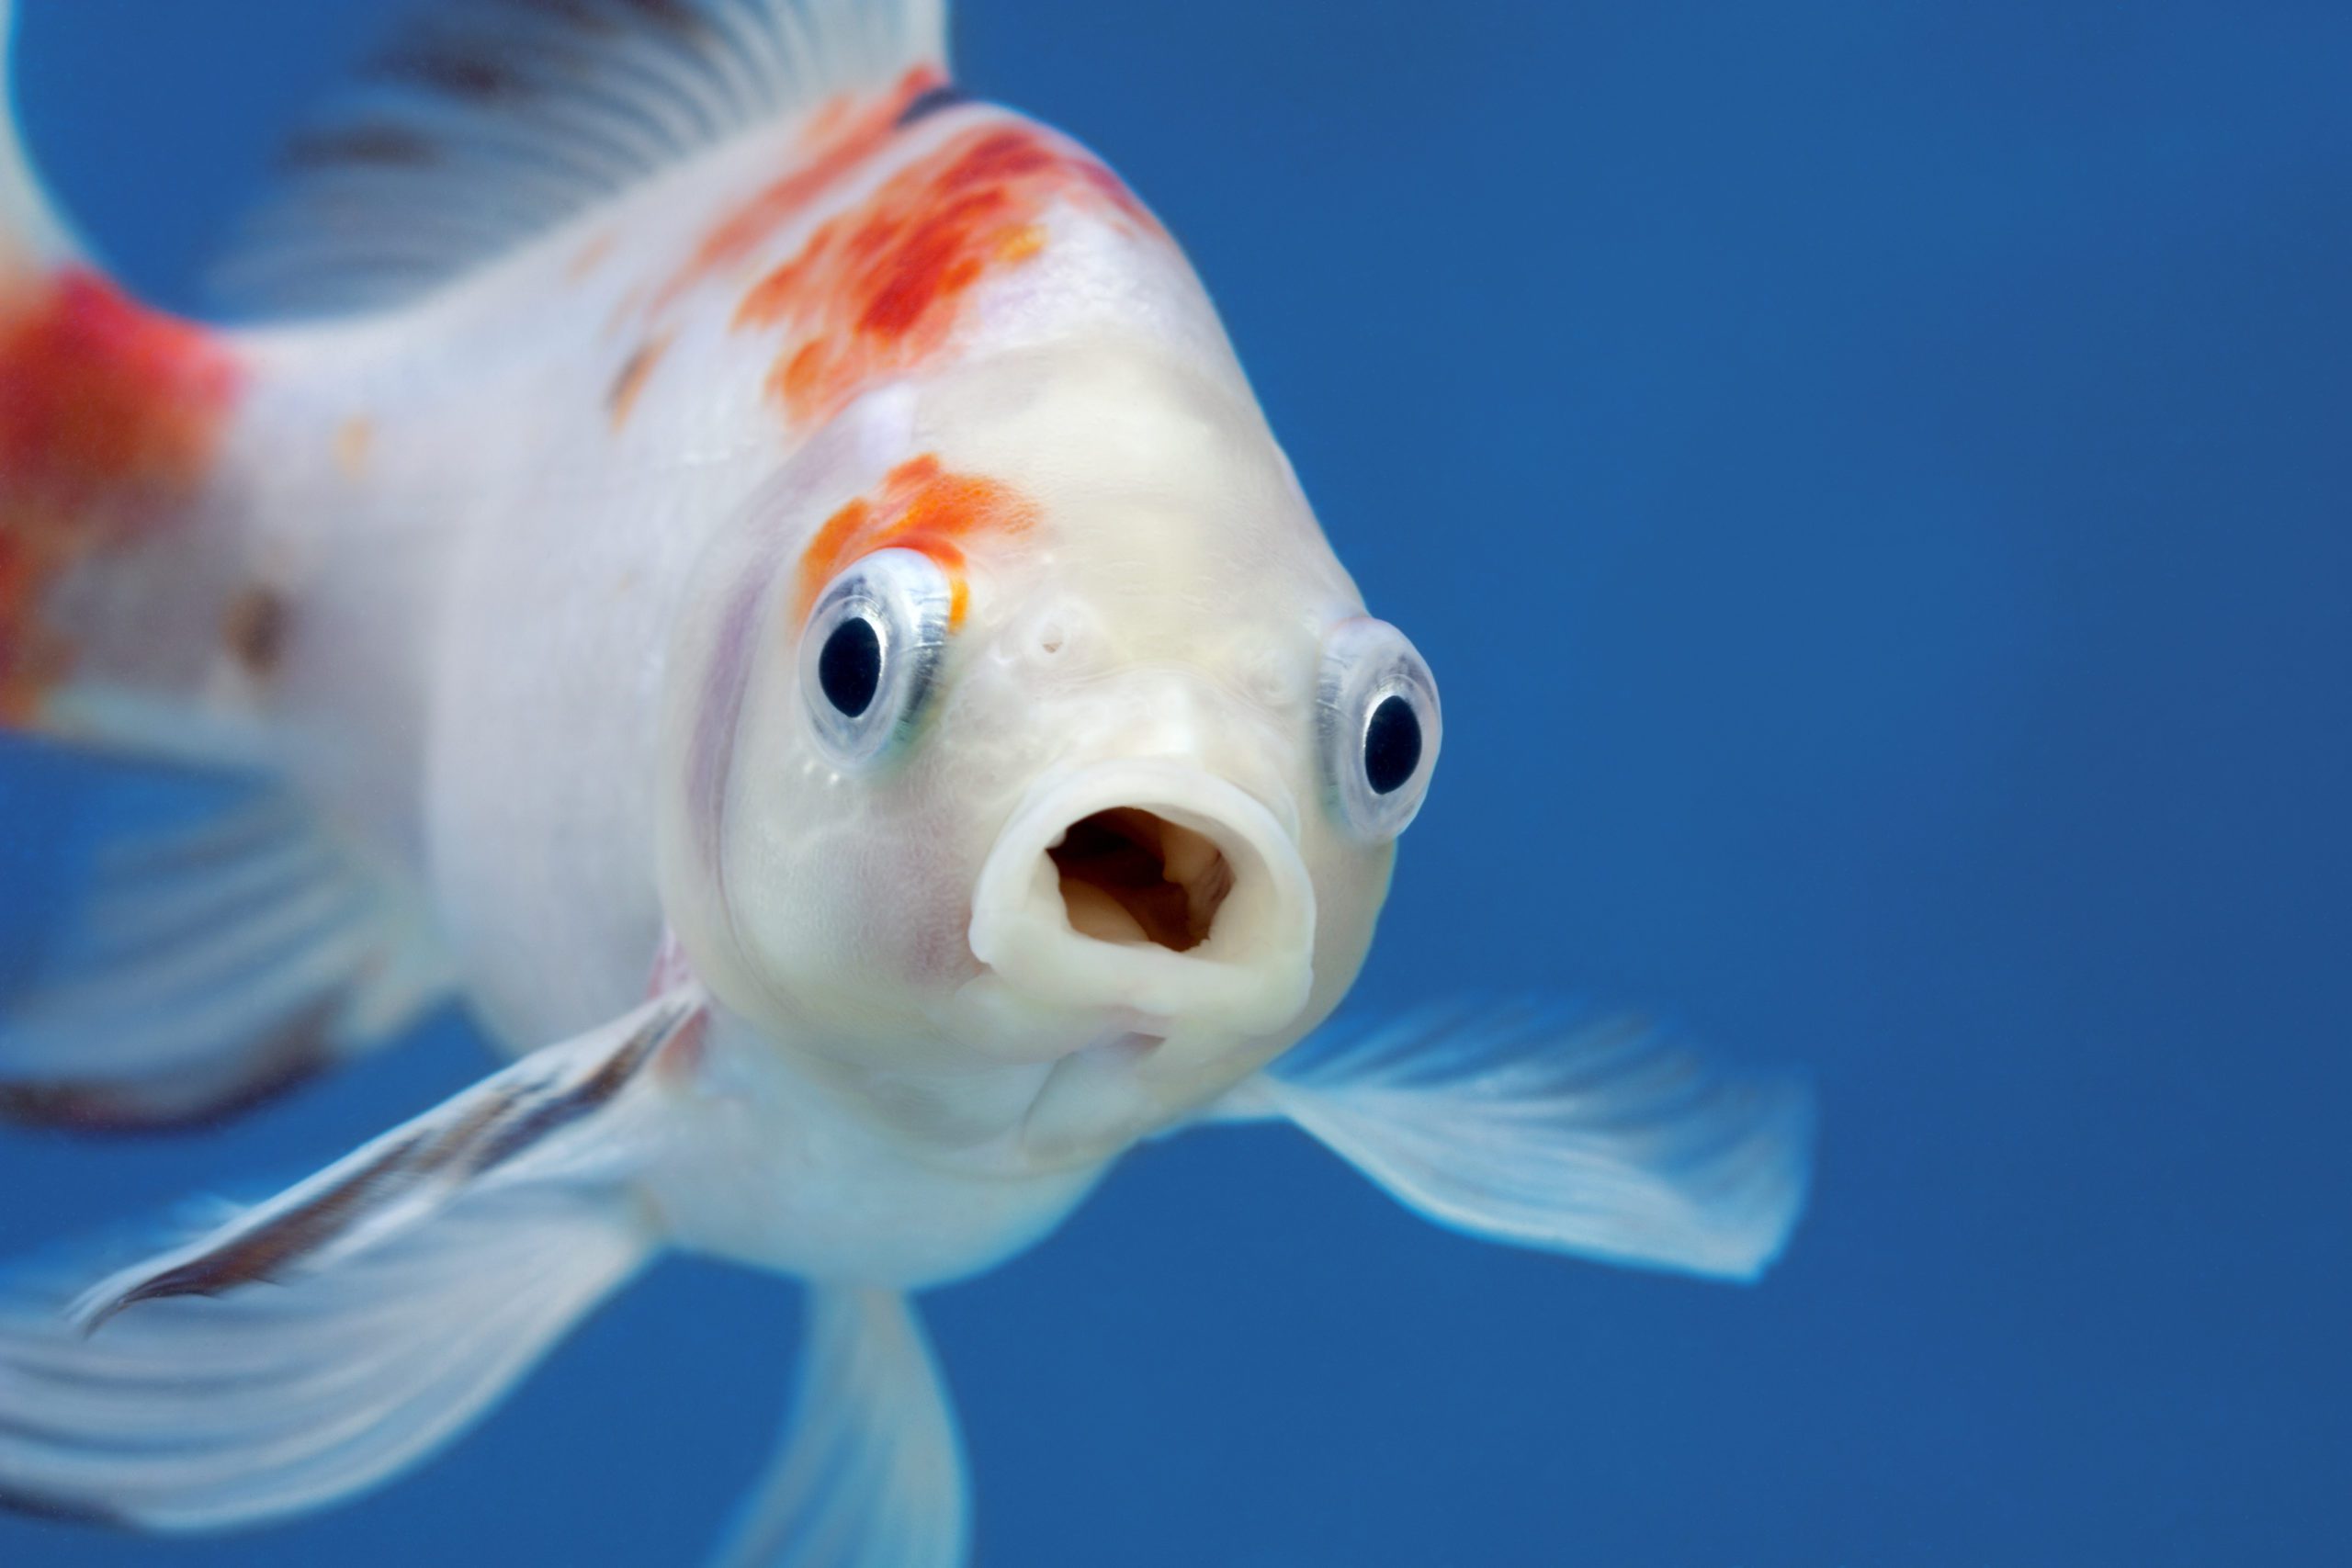 A Fish With Wide Open Mouth And Big Eyes, Surprised, Shocked Or